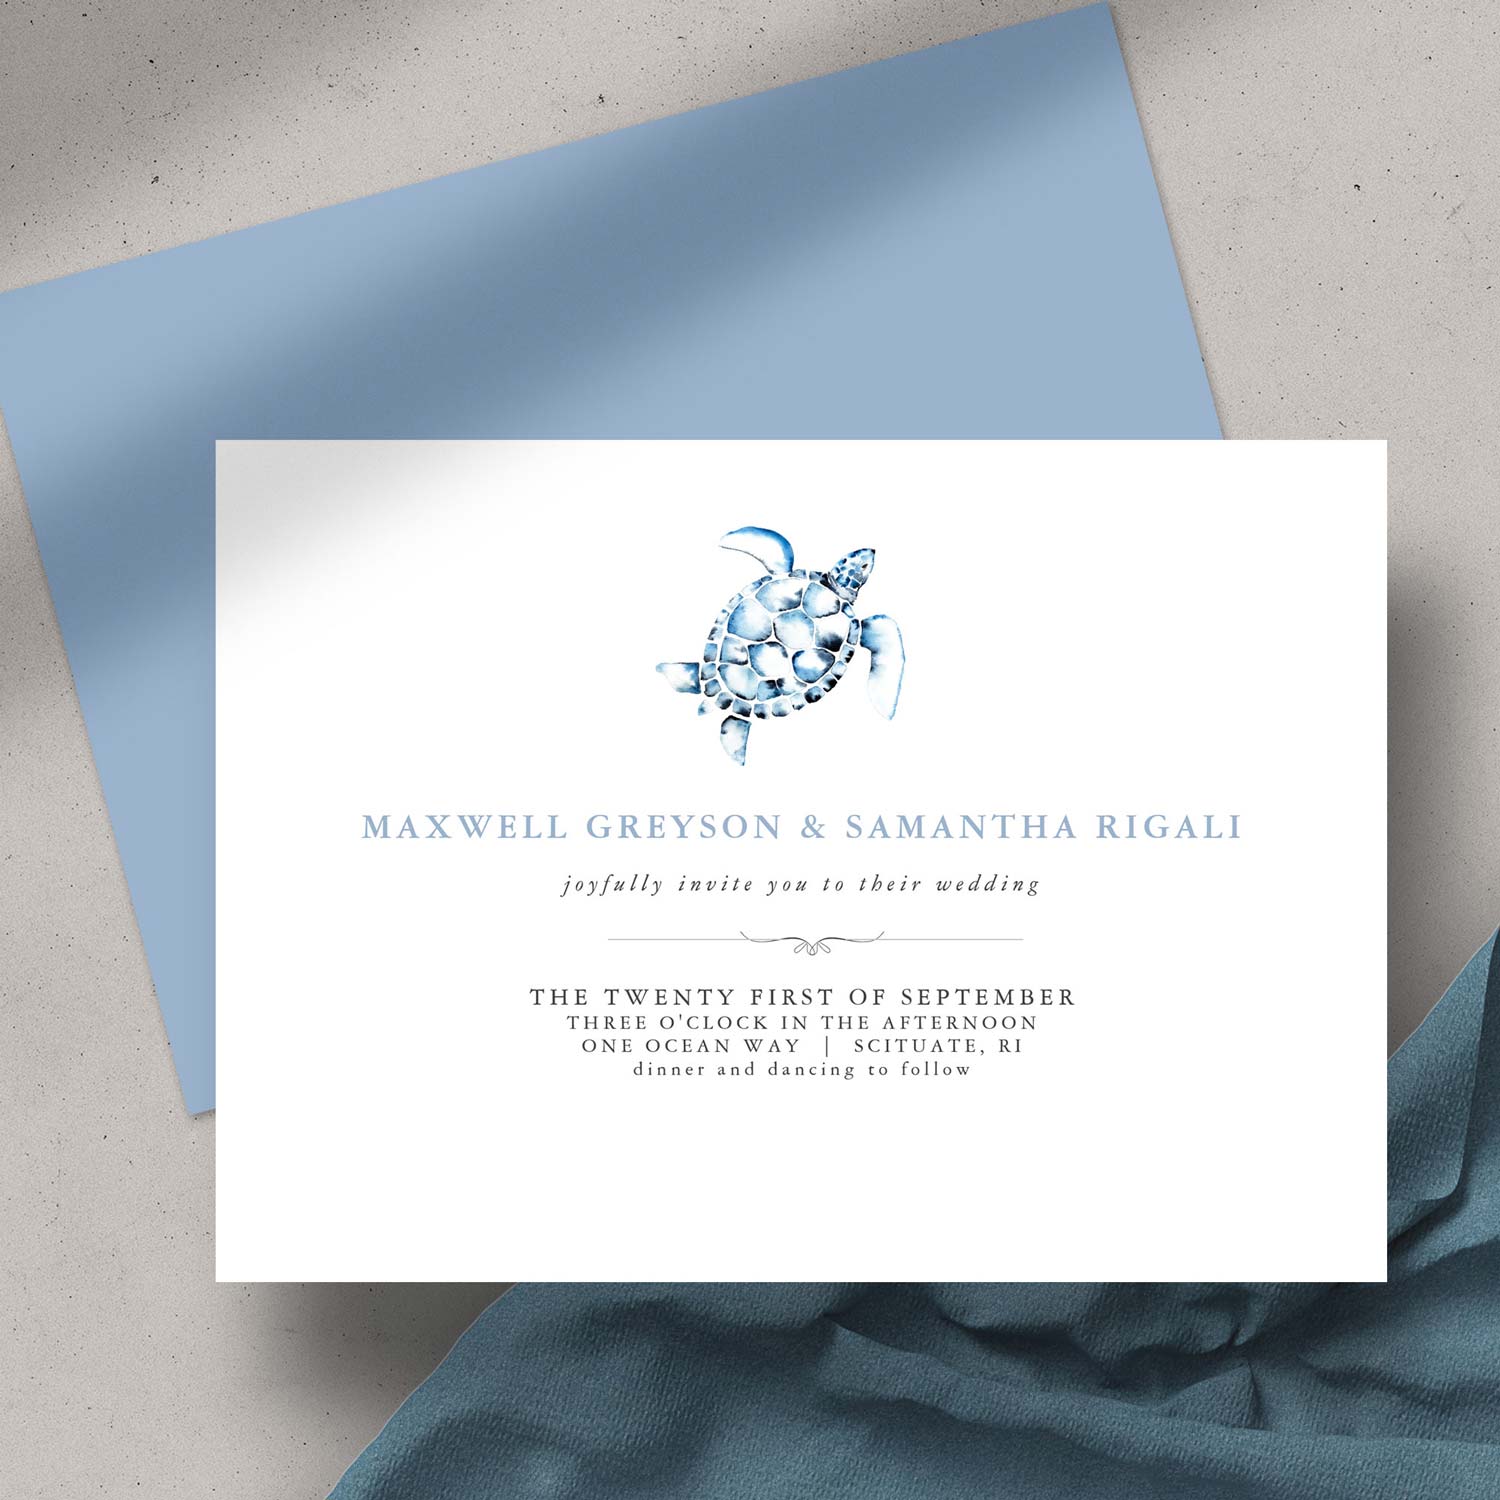 Beach wedding invitations features a minimalistic sea turtle in watercolor shades of dusty blue. Shop the complete wedding invitation theme by clicking on the image.